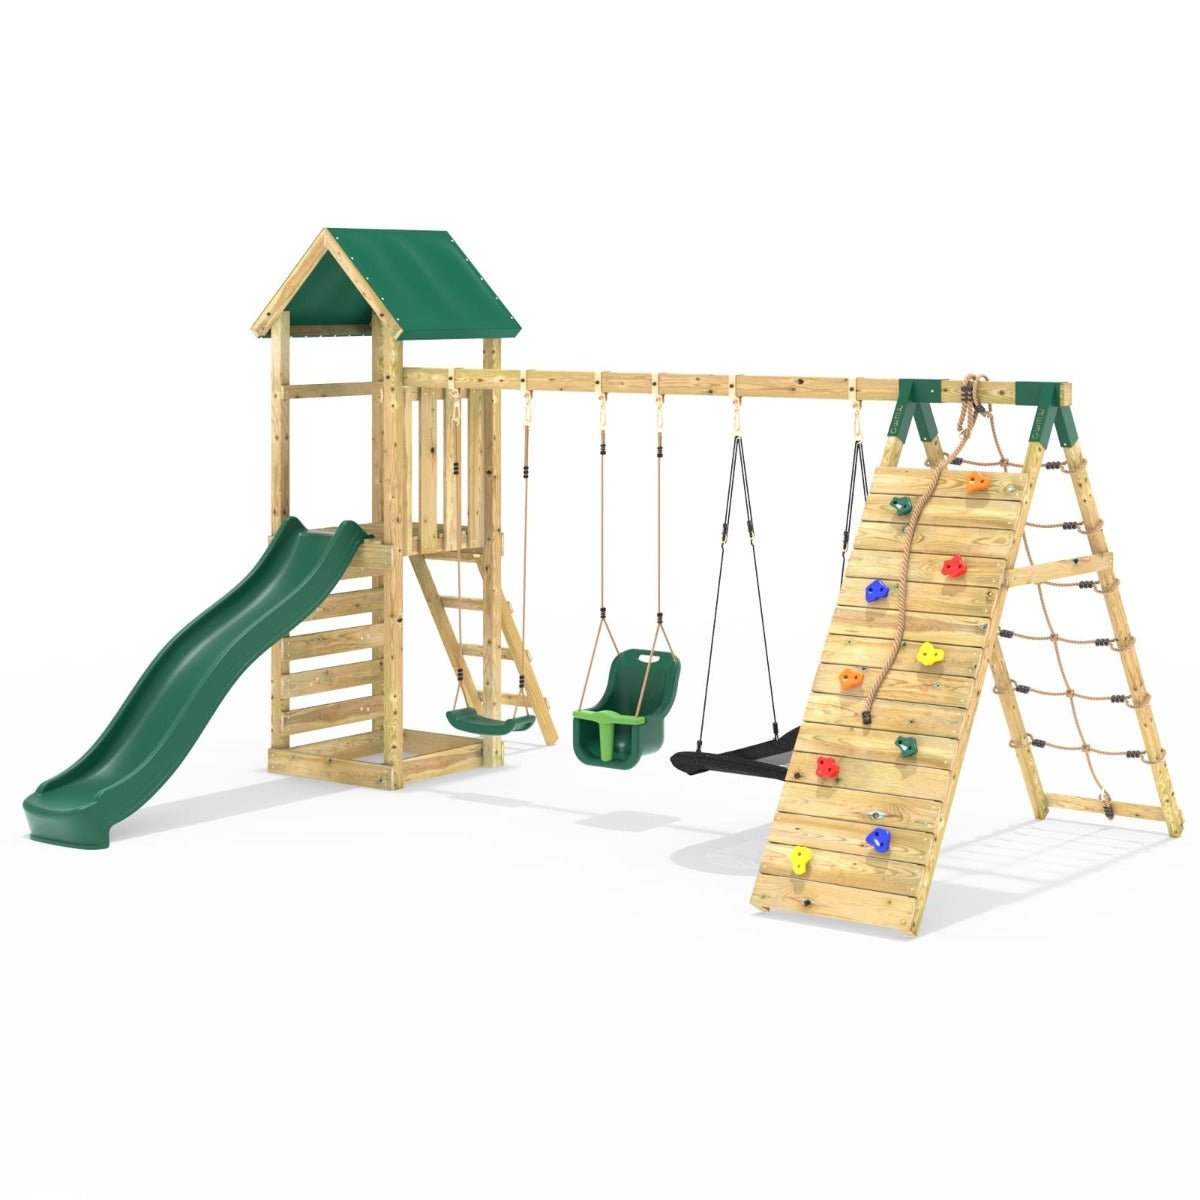 Rebo Challenge Wooden Climbing Frame with Swings, Slide and Up & over Climbing wall - Sanford